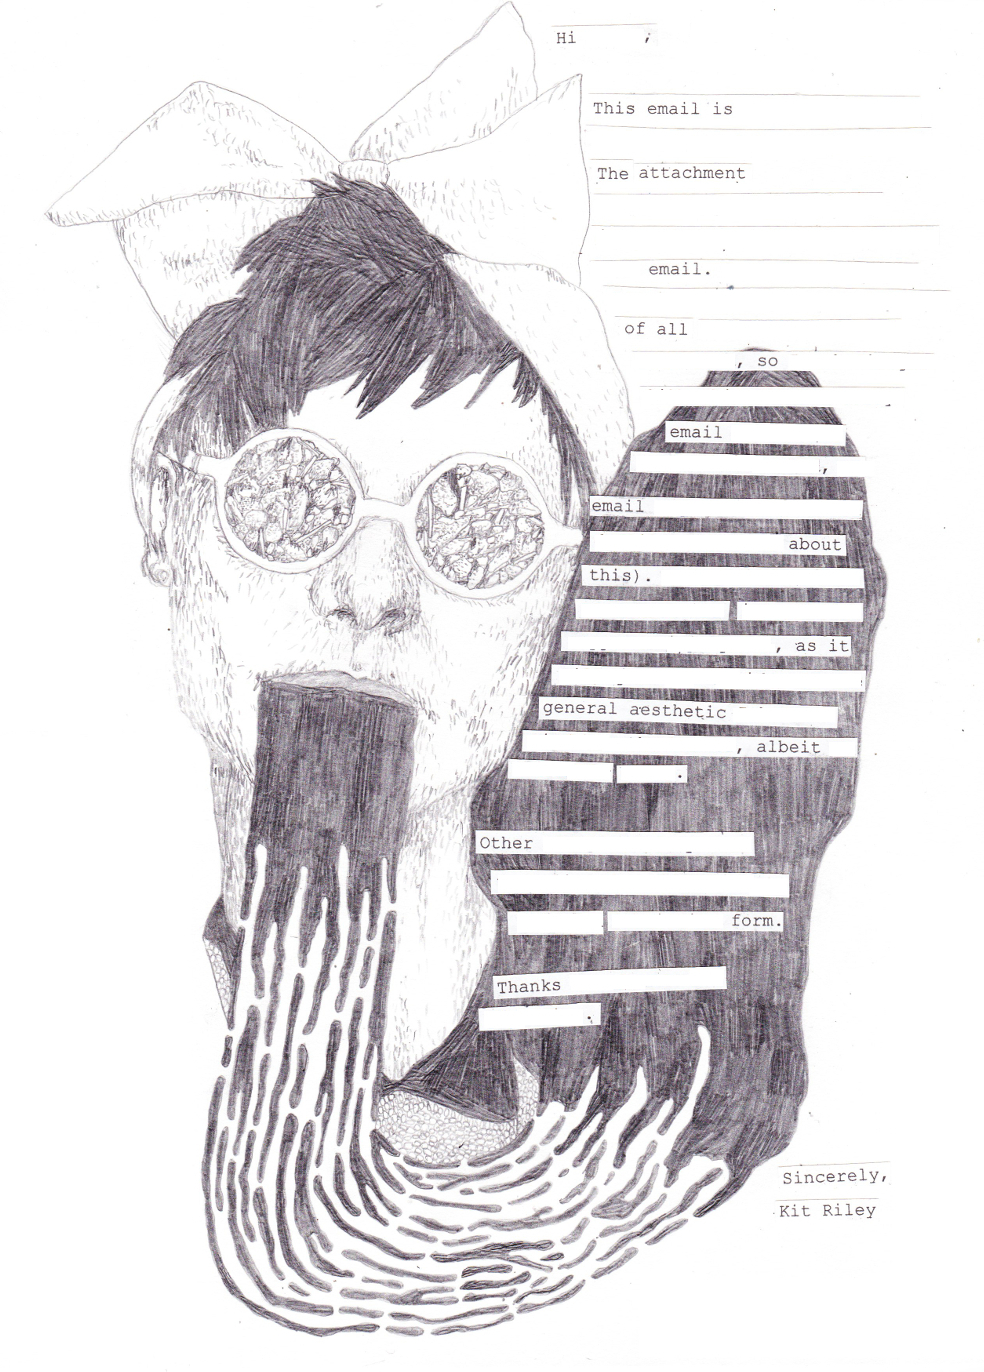 pencil drawing of a young woman wearing sunglasses made of dirt and spewing a black goop, next to collaged strips of redacted text